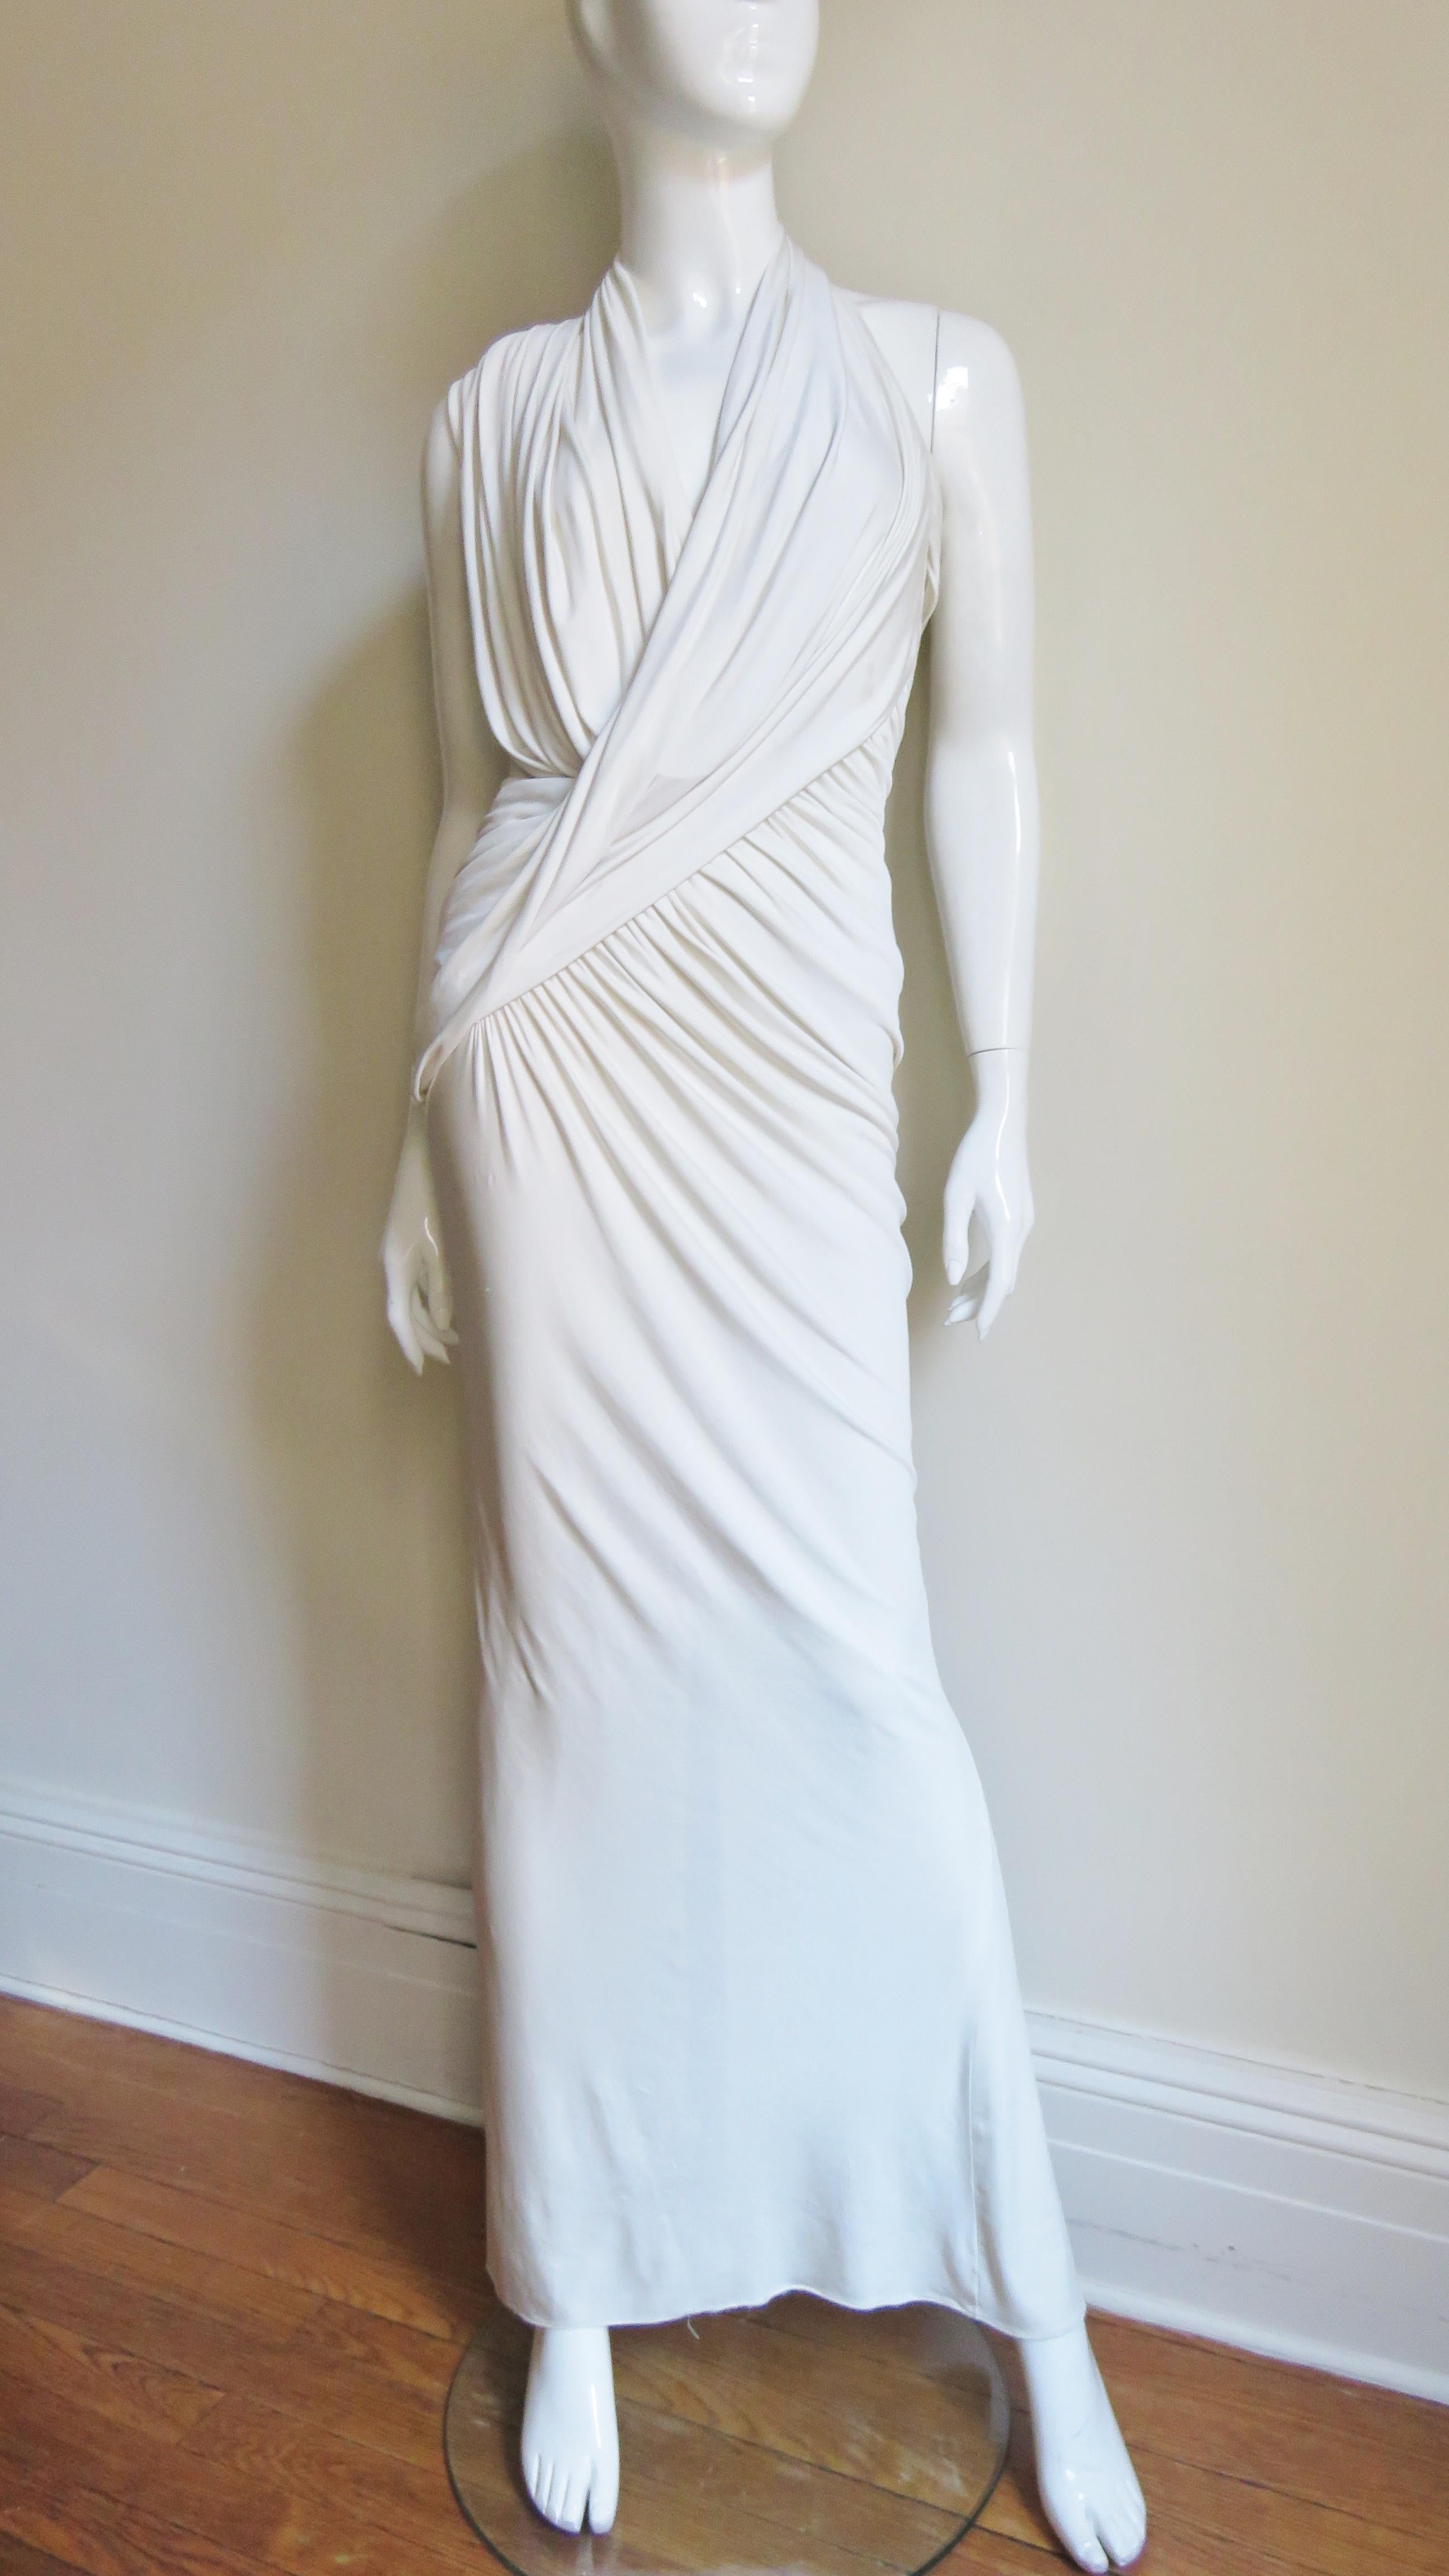 A beautiful white silk jersey dress gown from Donna Karan.  It has a plunging, crossing ruched halter neckline.  There is angled ruching across front skirt, the derriere, and draping at the upper back.  The back skirt has added fullness below the